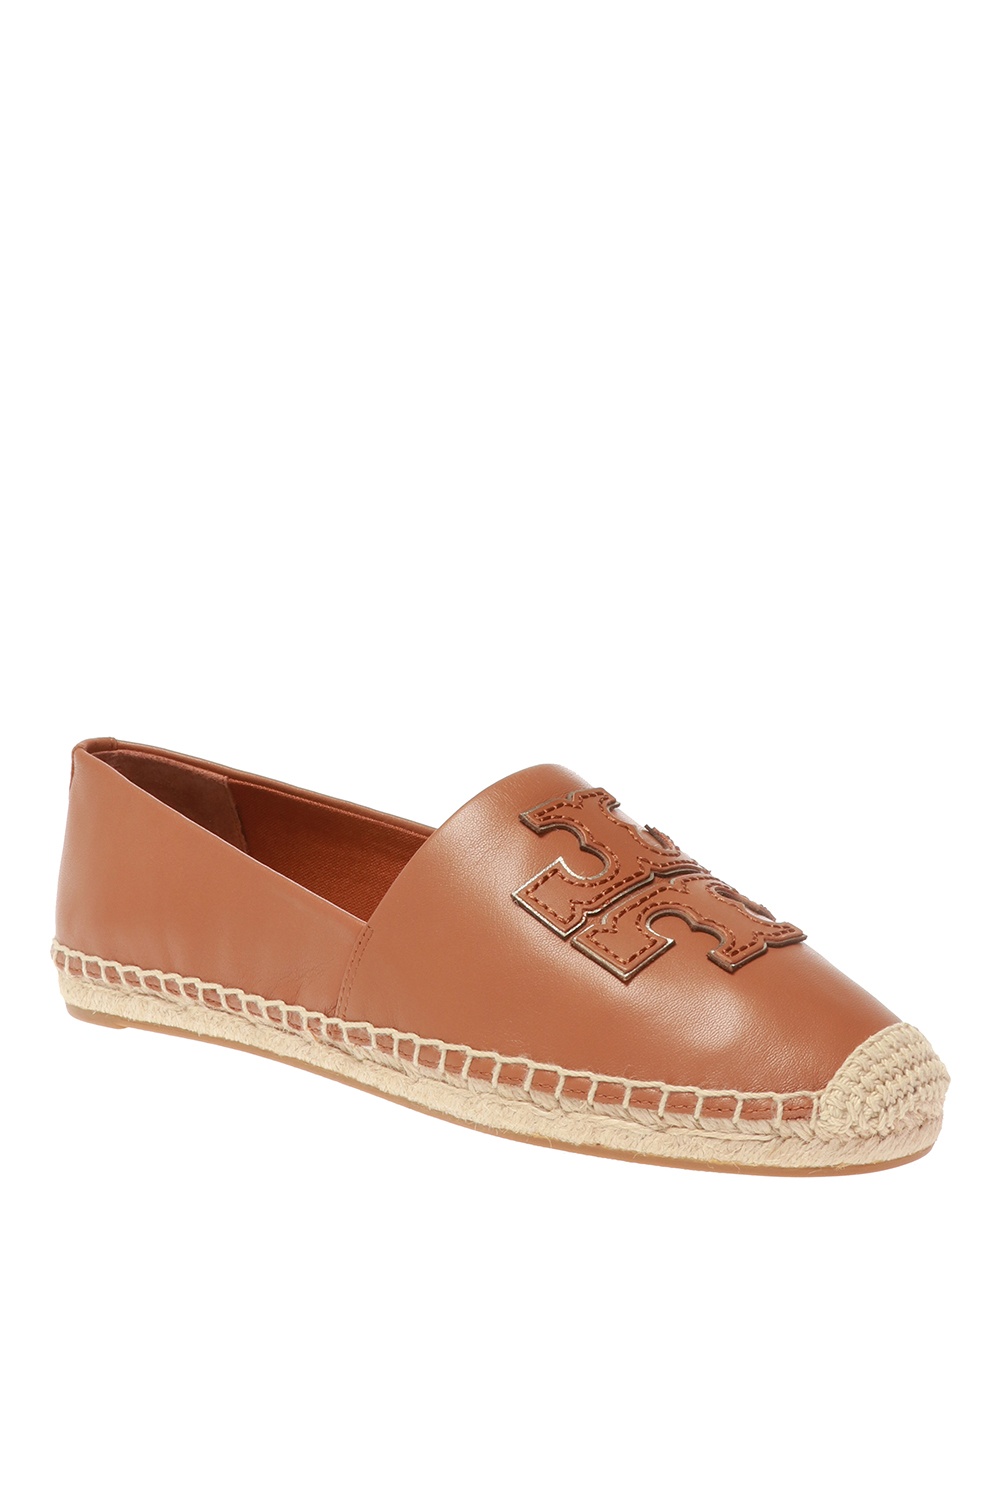 Tory Burch Branded leather espadrilles | Women's Shoes | Vitkac